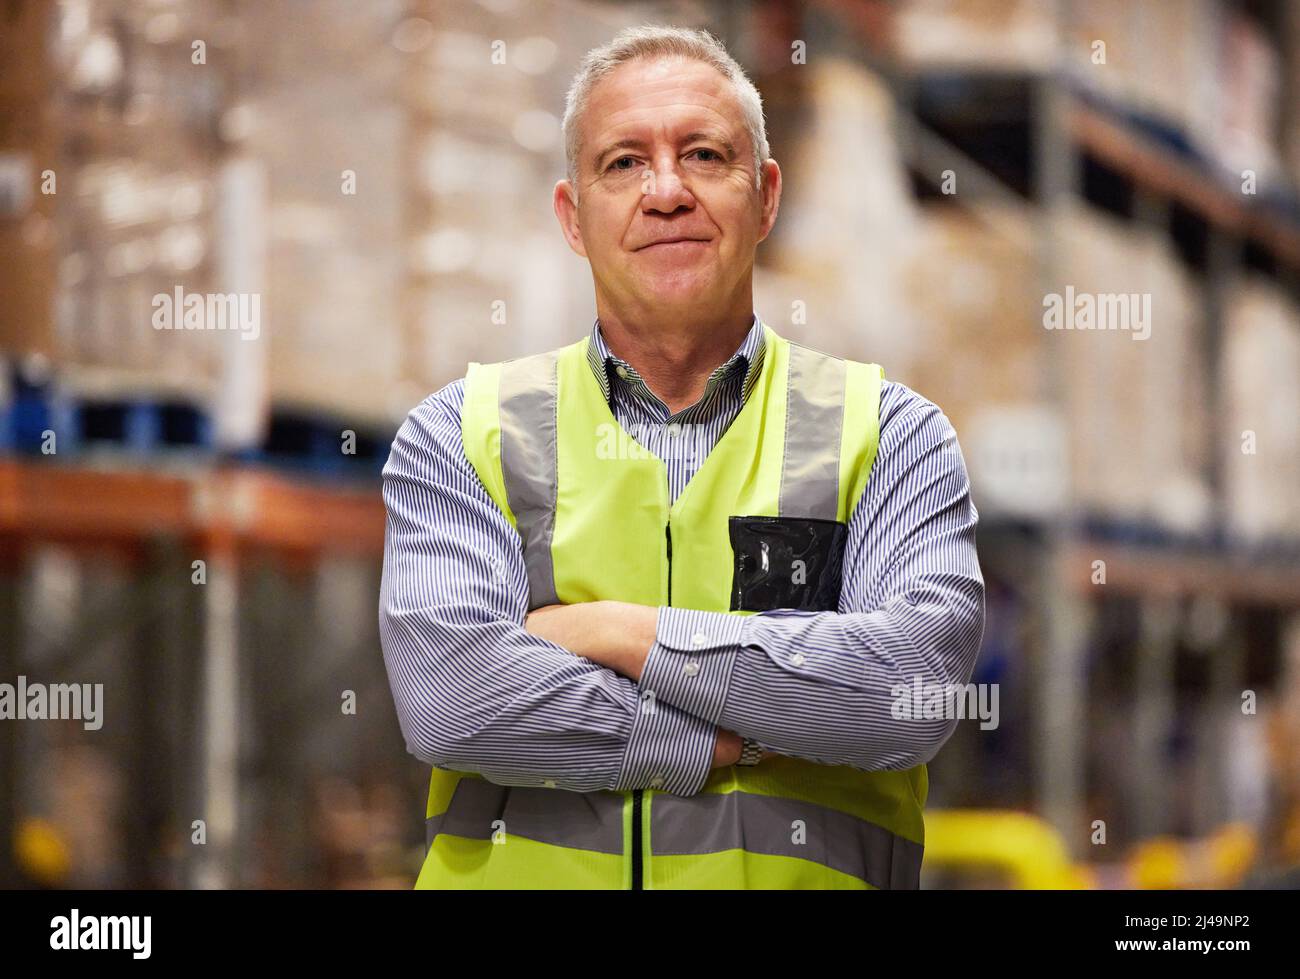 Leave it to the logistical specialist. Portrait of a mature man working in a warehouse. Stock Photo